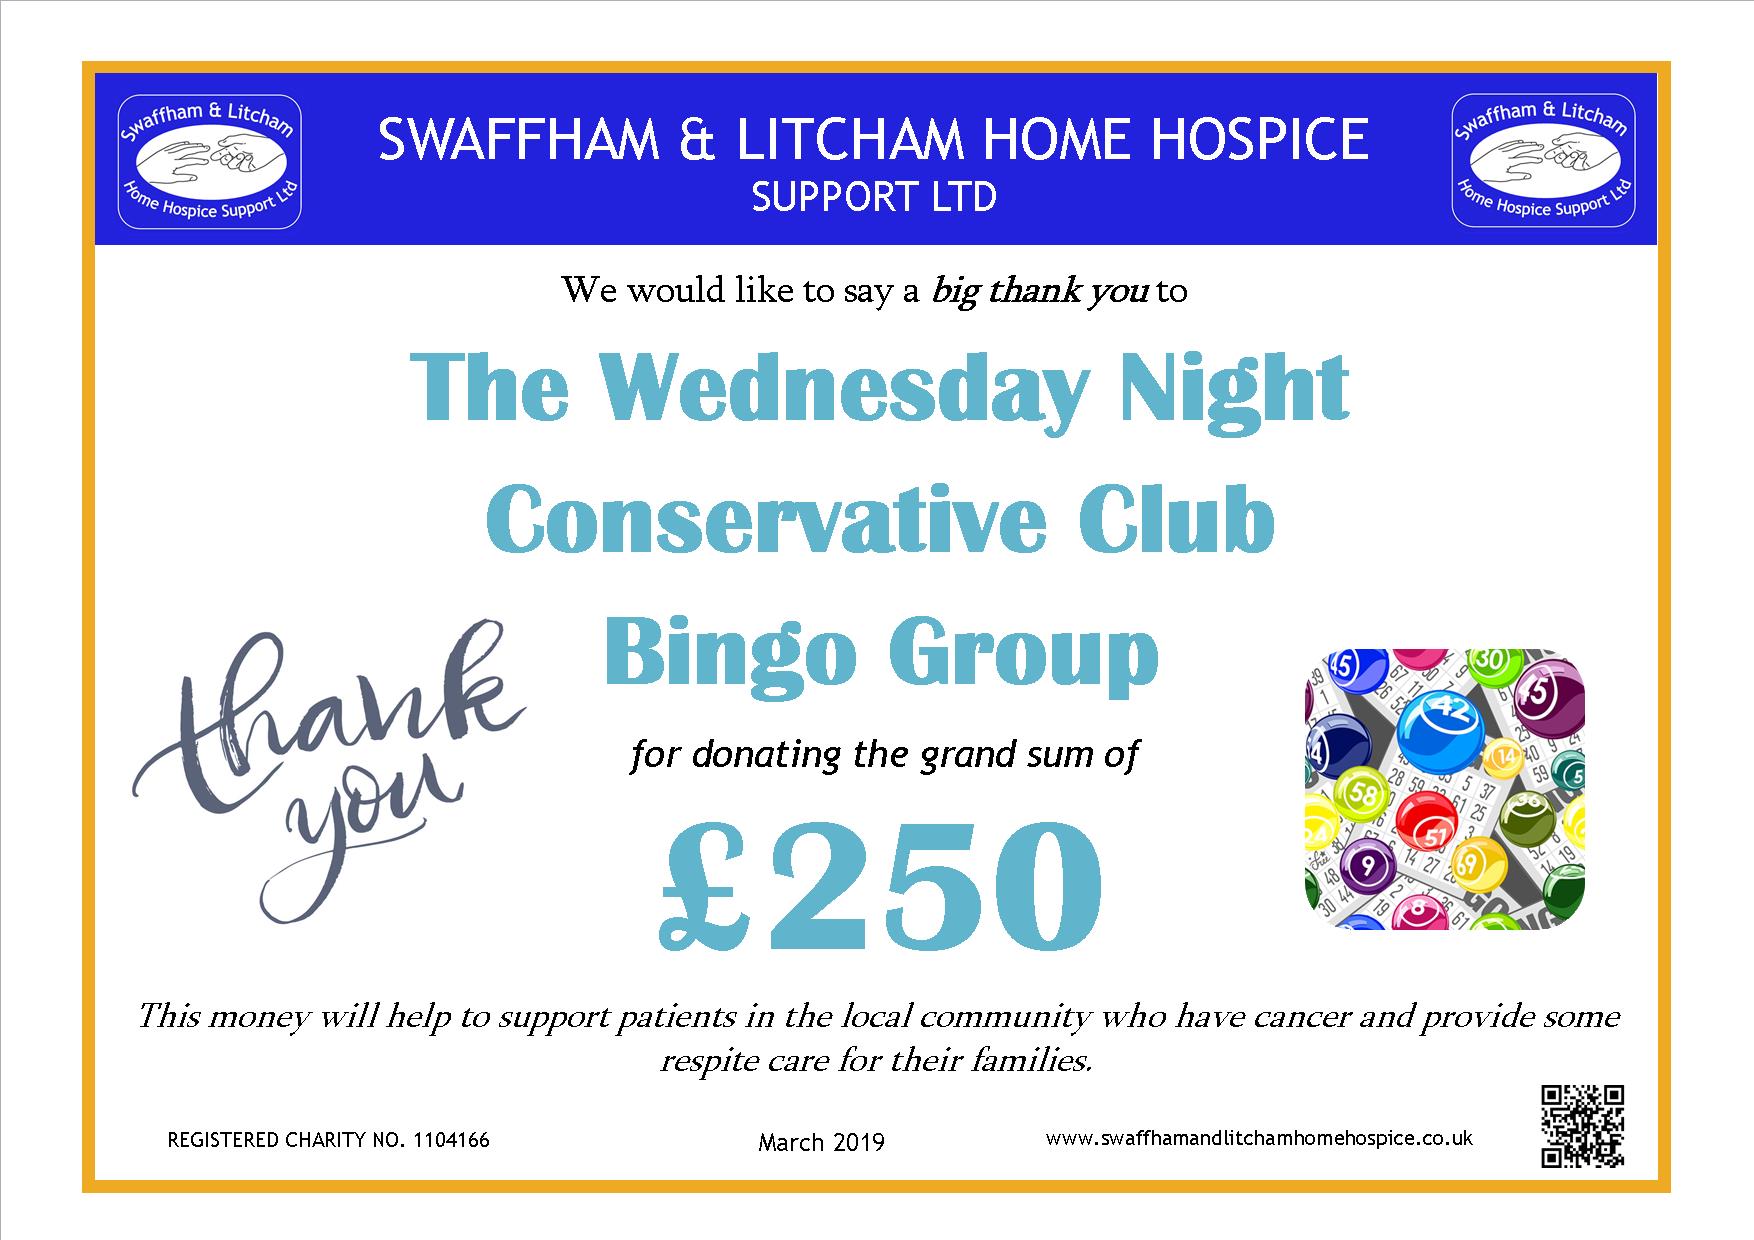 Money raised at the Wednesday Night Conservative Club Bingo Group, March 2019